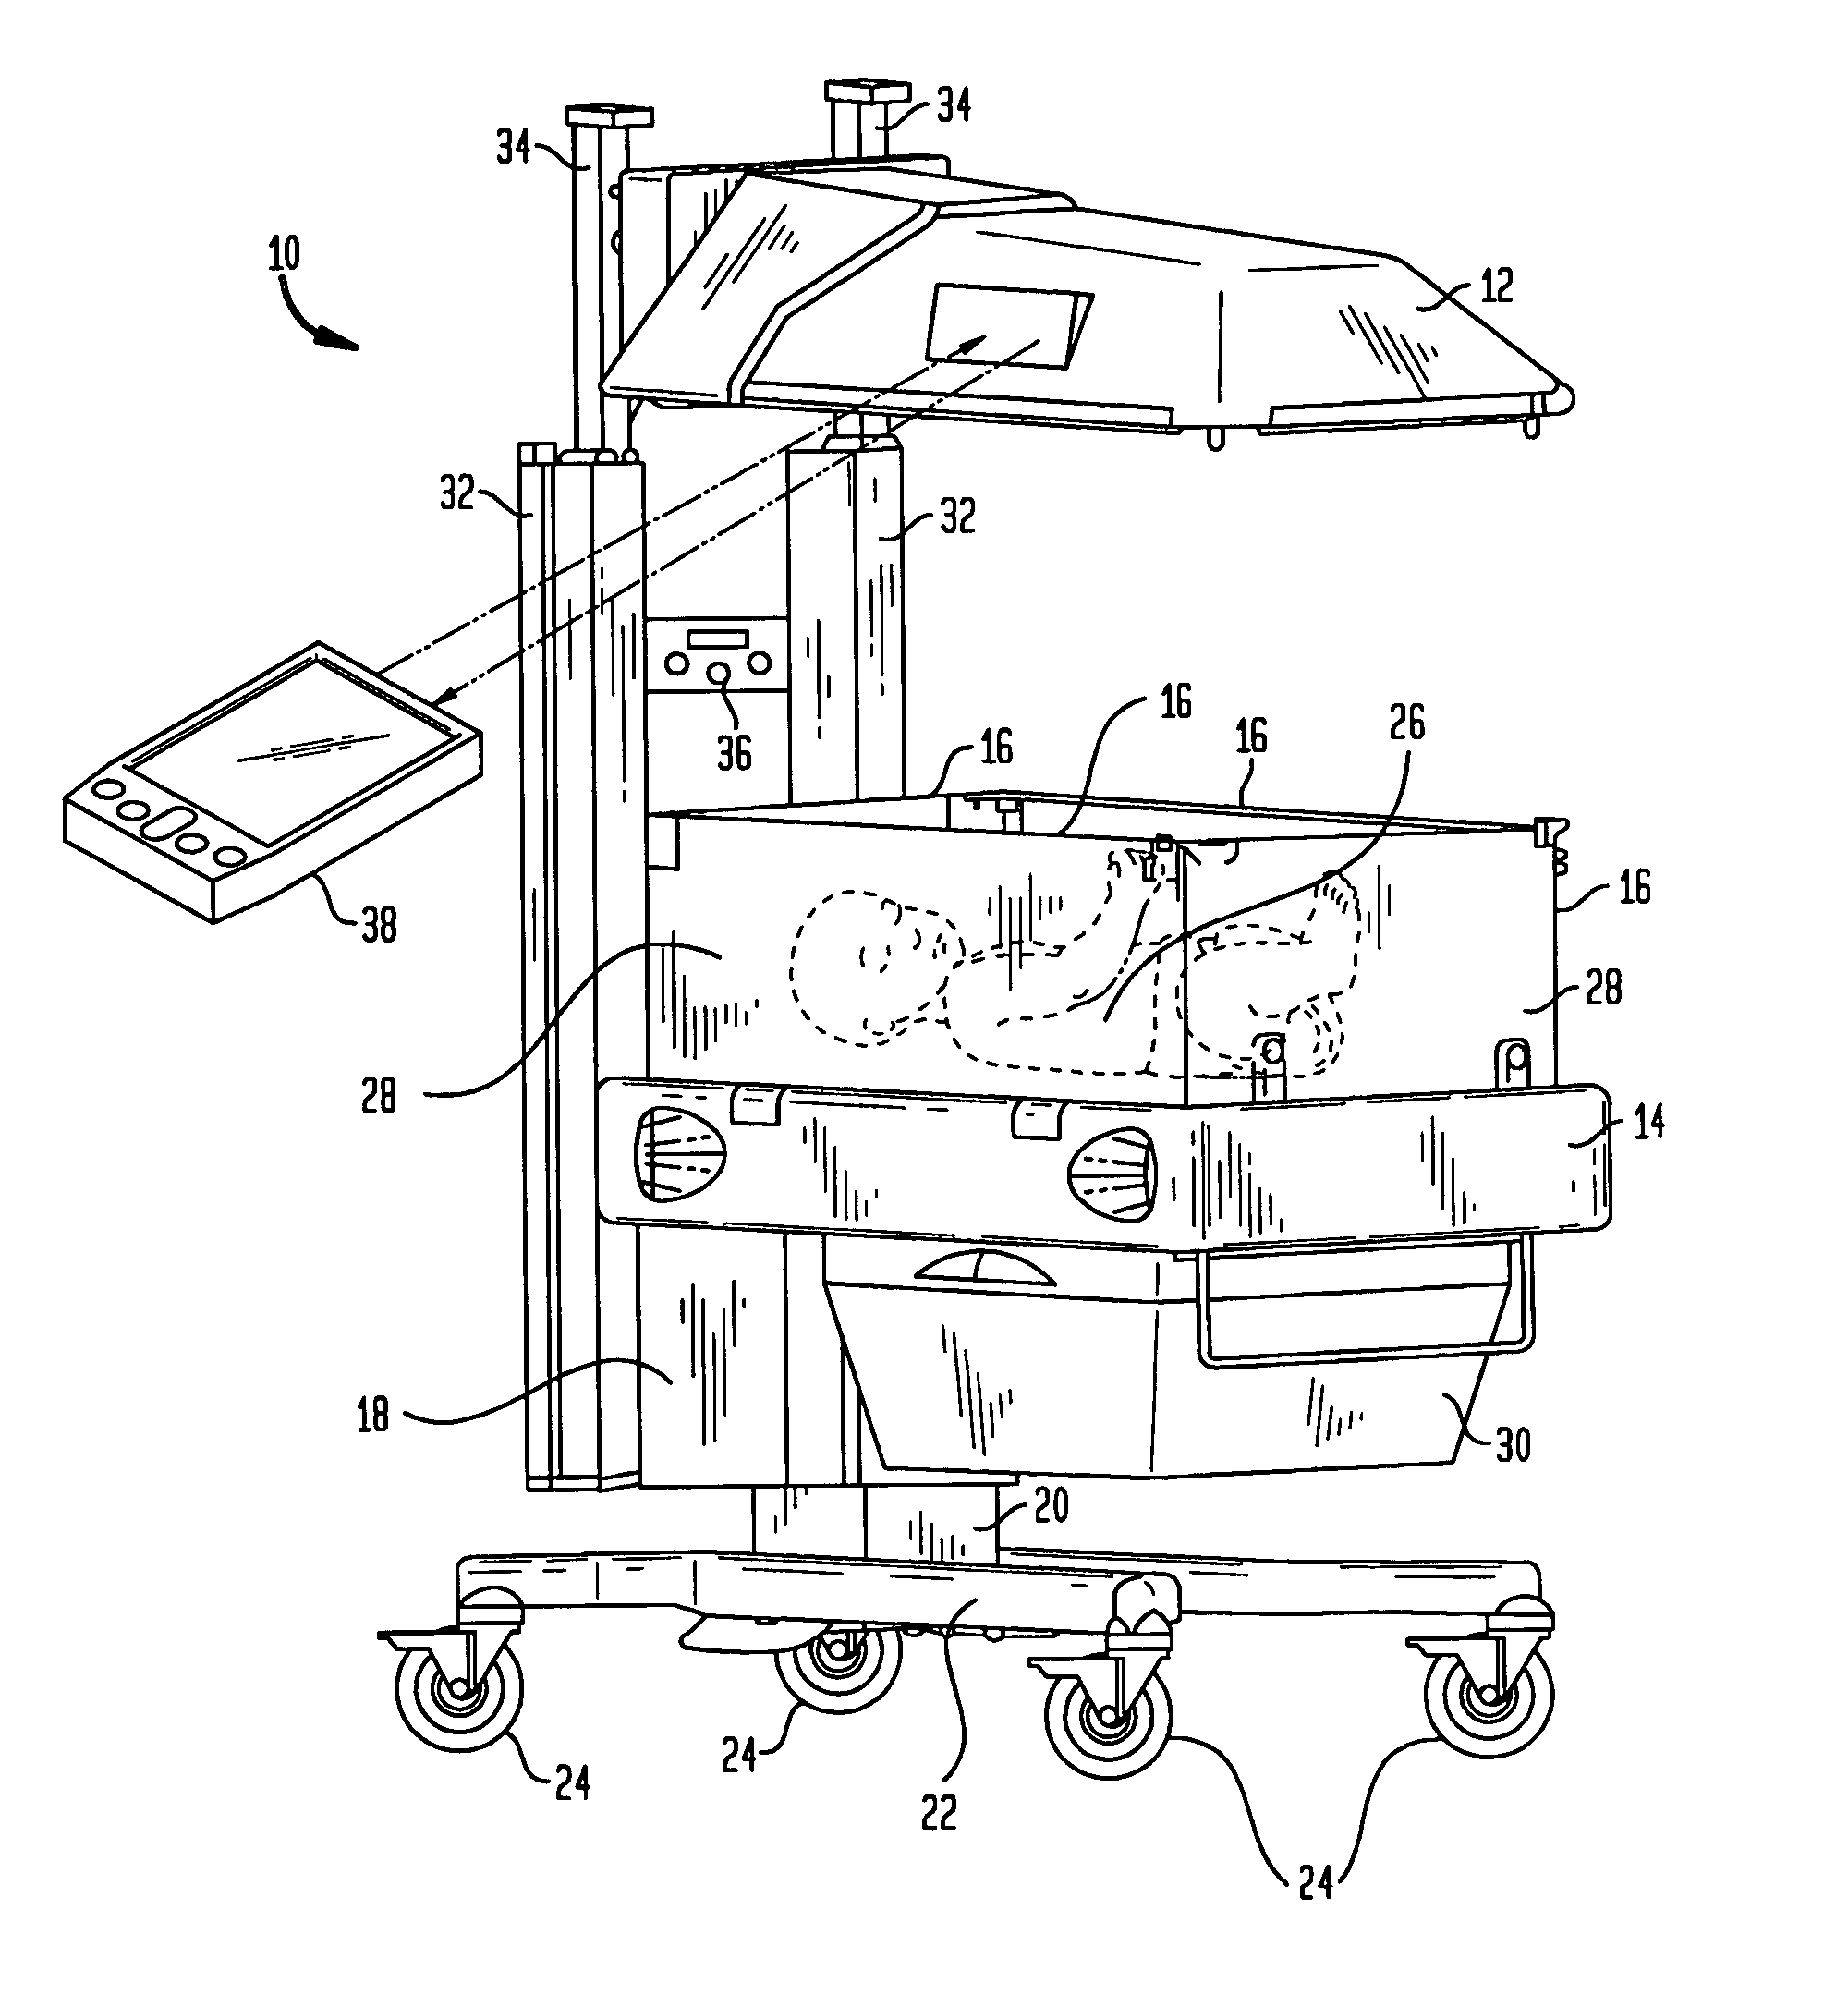 Infrared communication with infant care apparatus